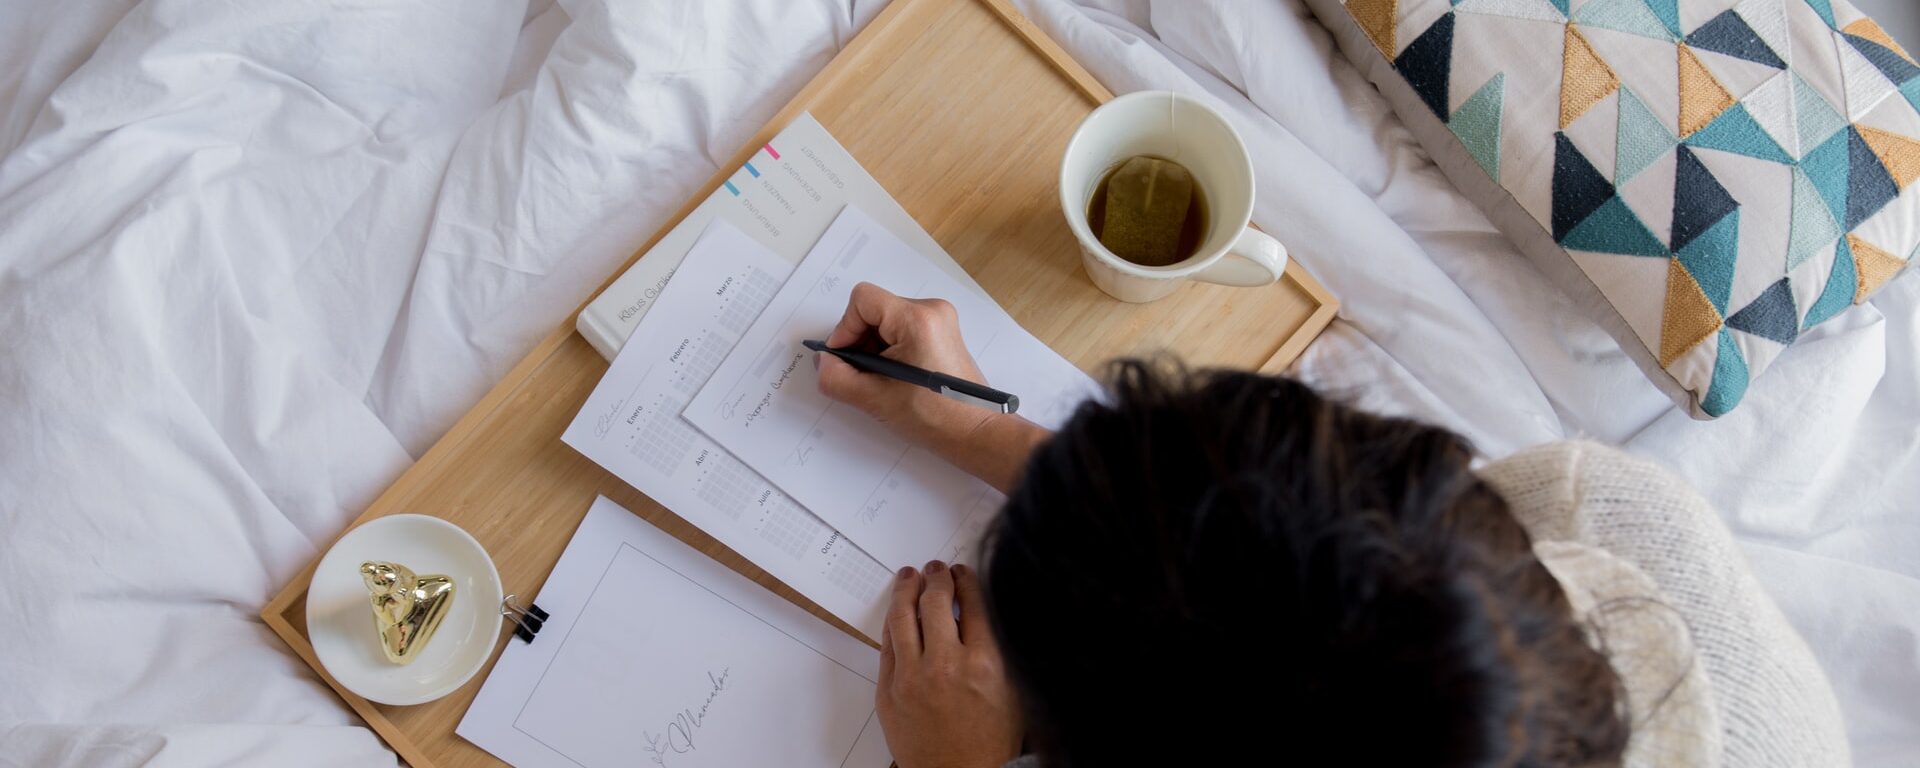 8 Ways to Create (And Stick To) A Writing Schedule